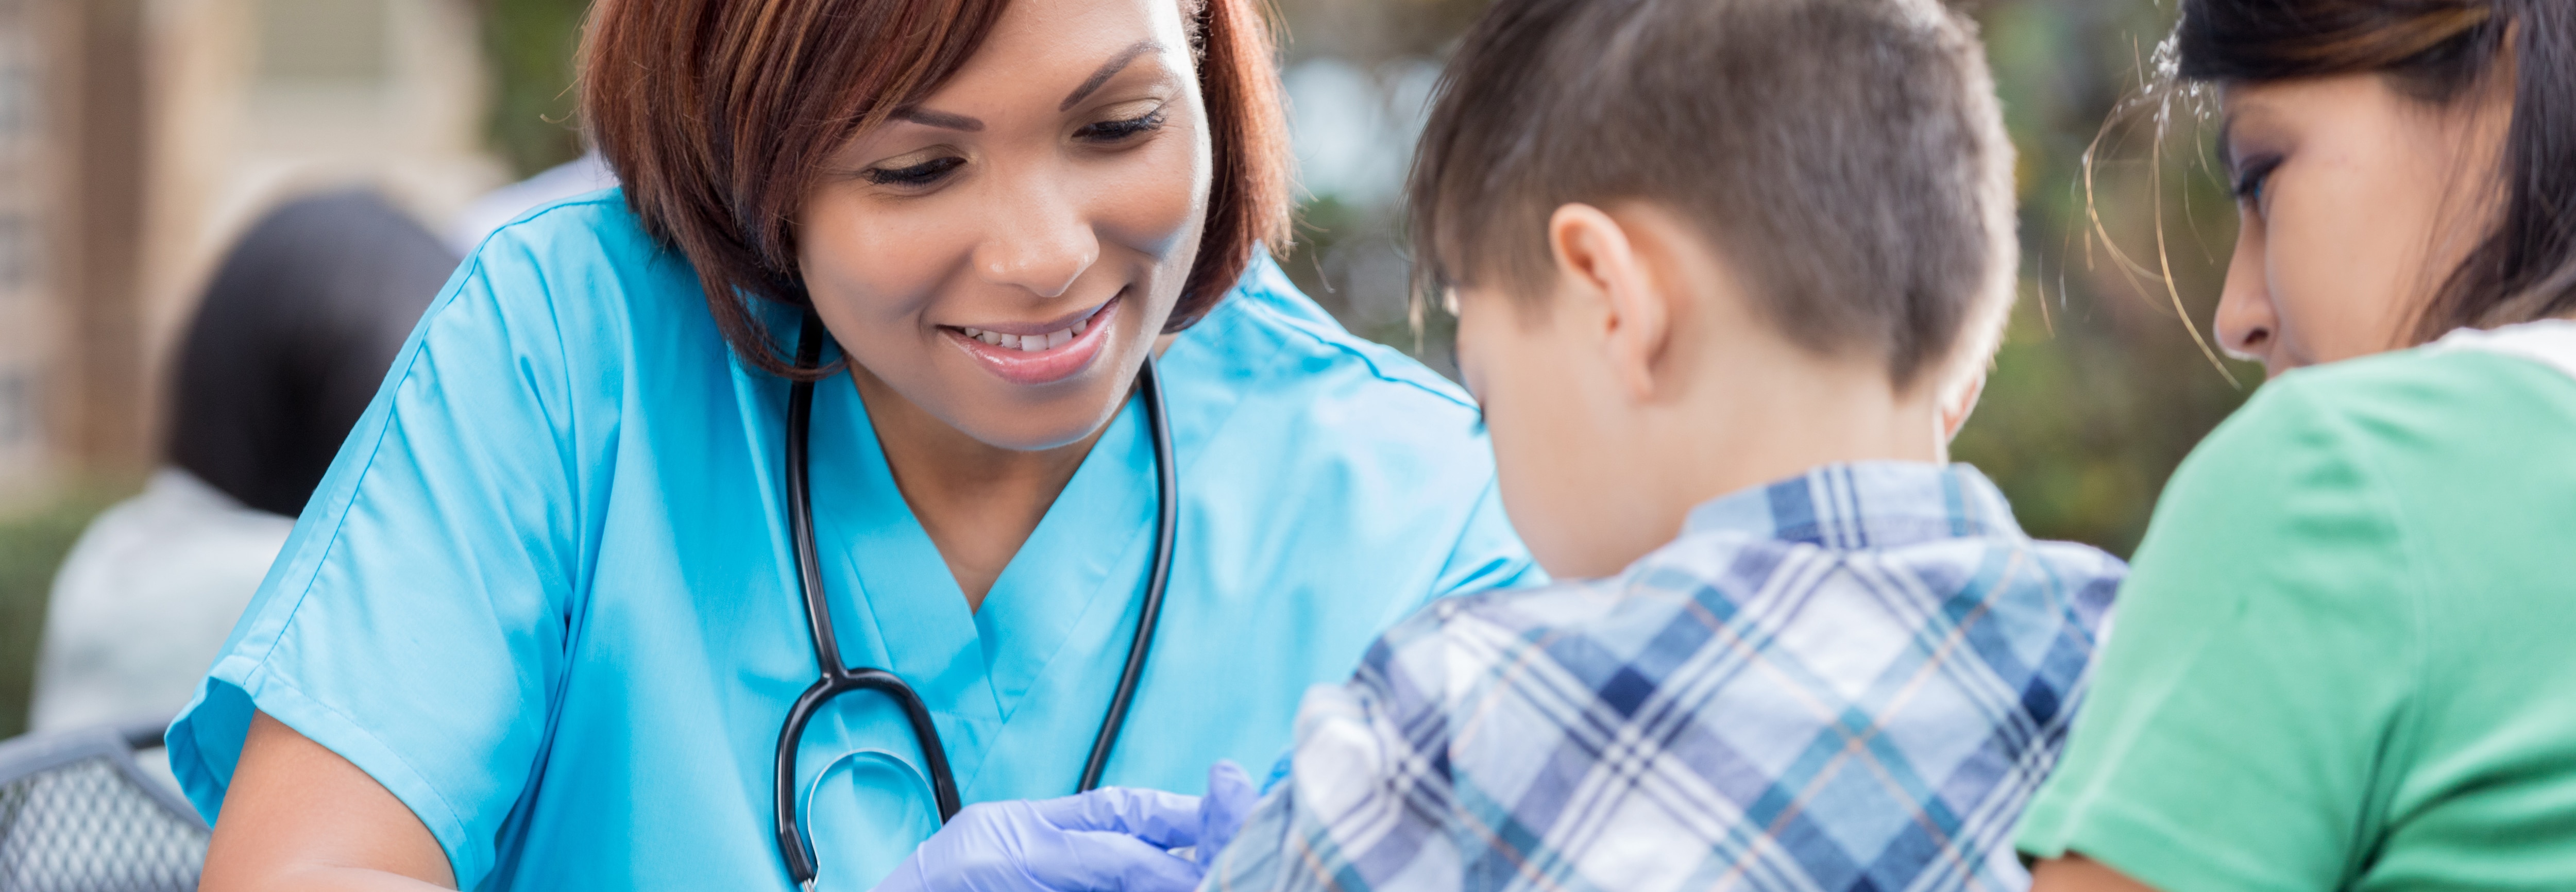 Mid adult African American nurse gives a young boy an immunization at an outdoor free clinic. The boy is sitting in his mom's lap. The nurse is wearing scrubs and a stethoscope.